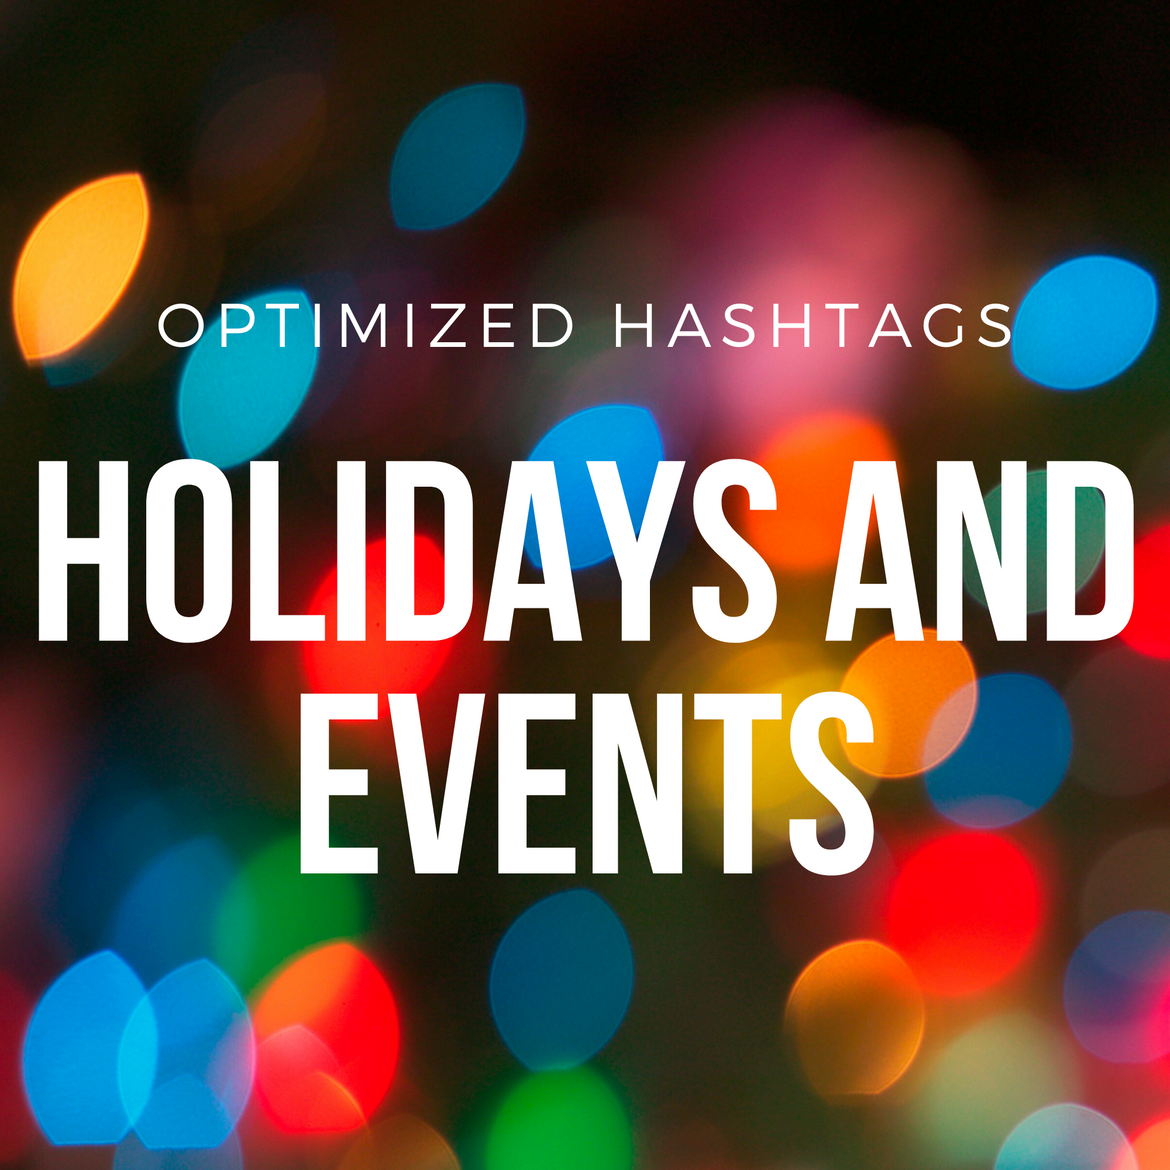 HOLIDAYS AND EVENTS